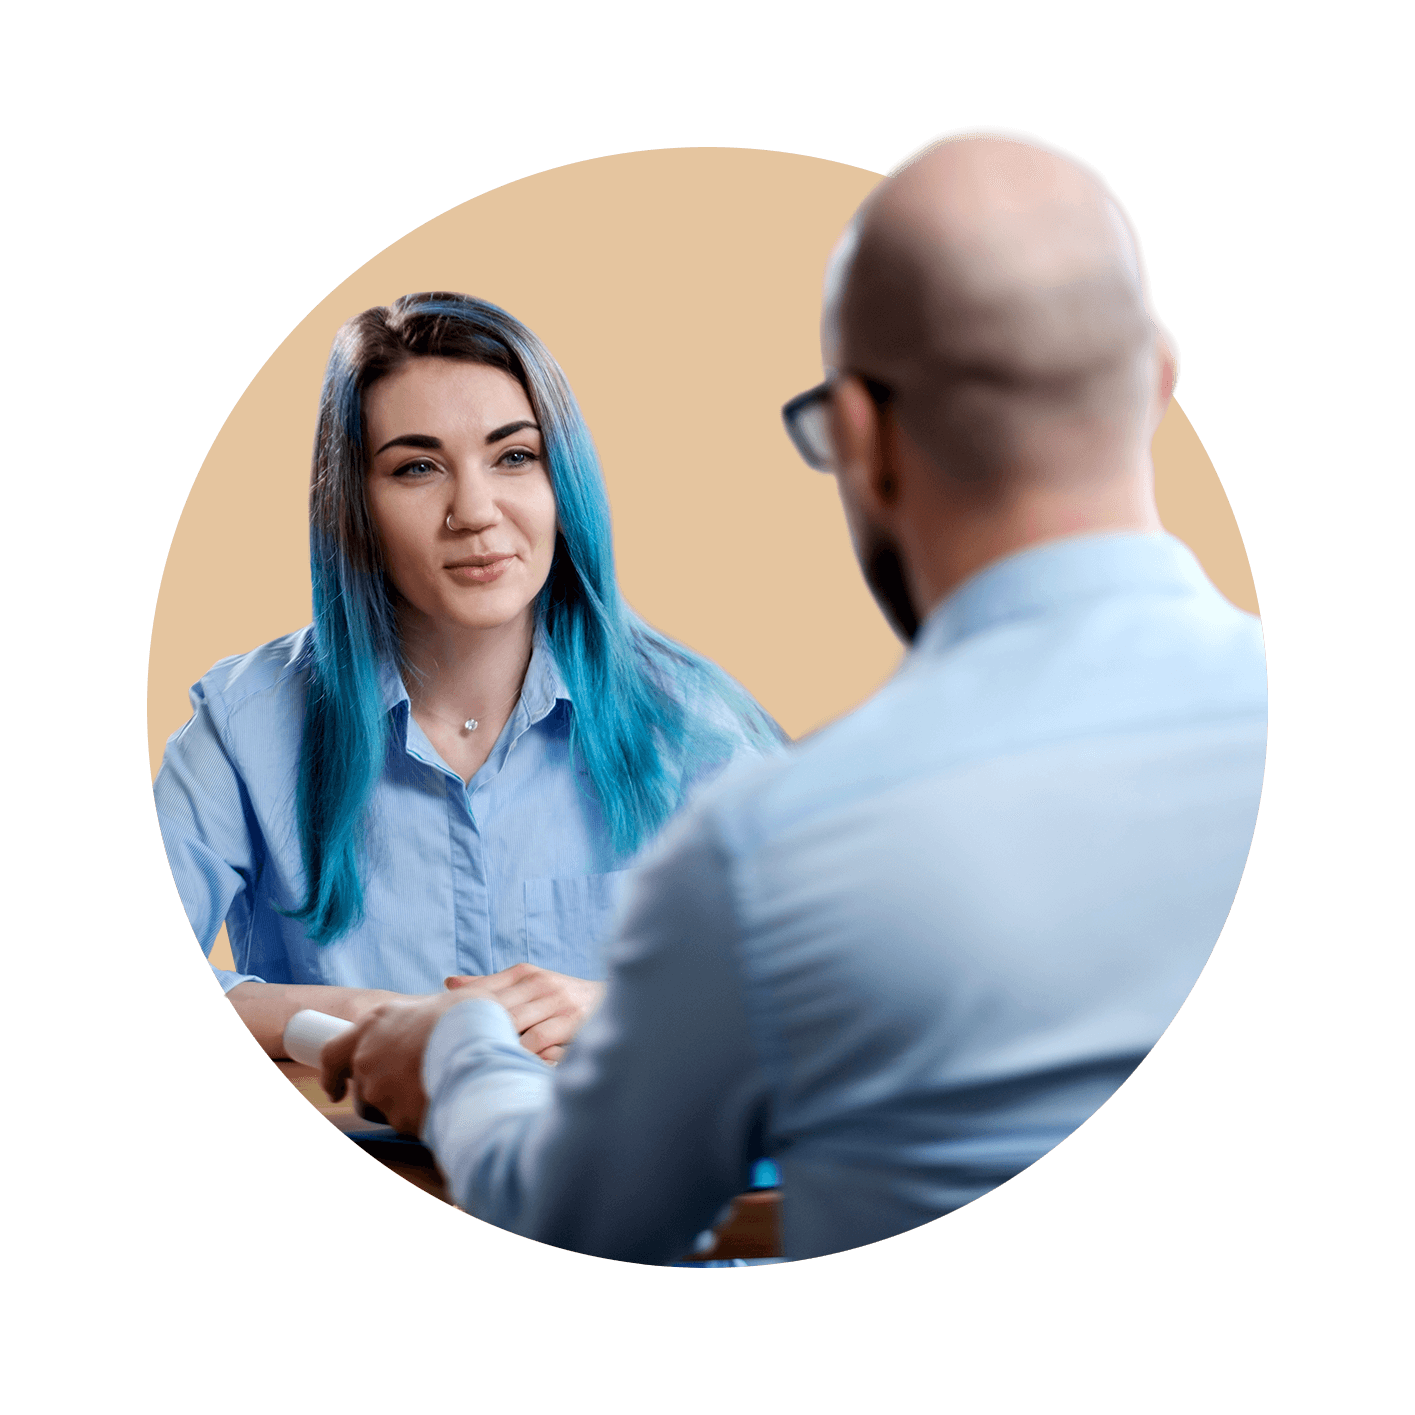 Teenager with blue hair speaking to counsellor